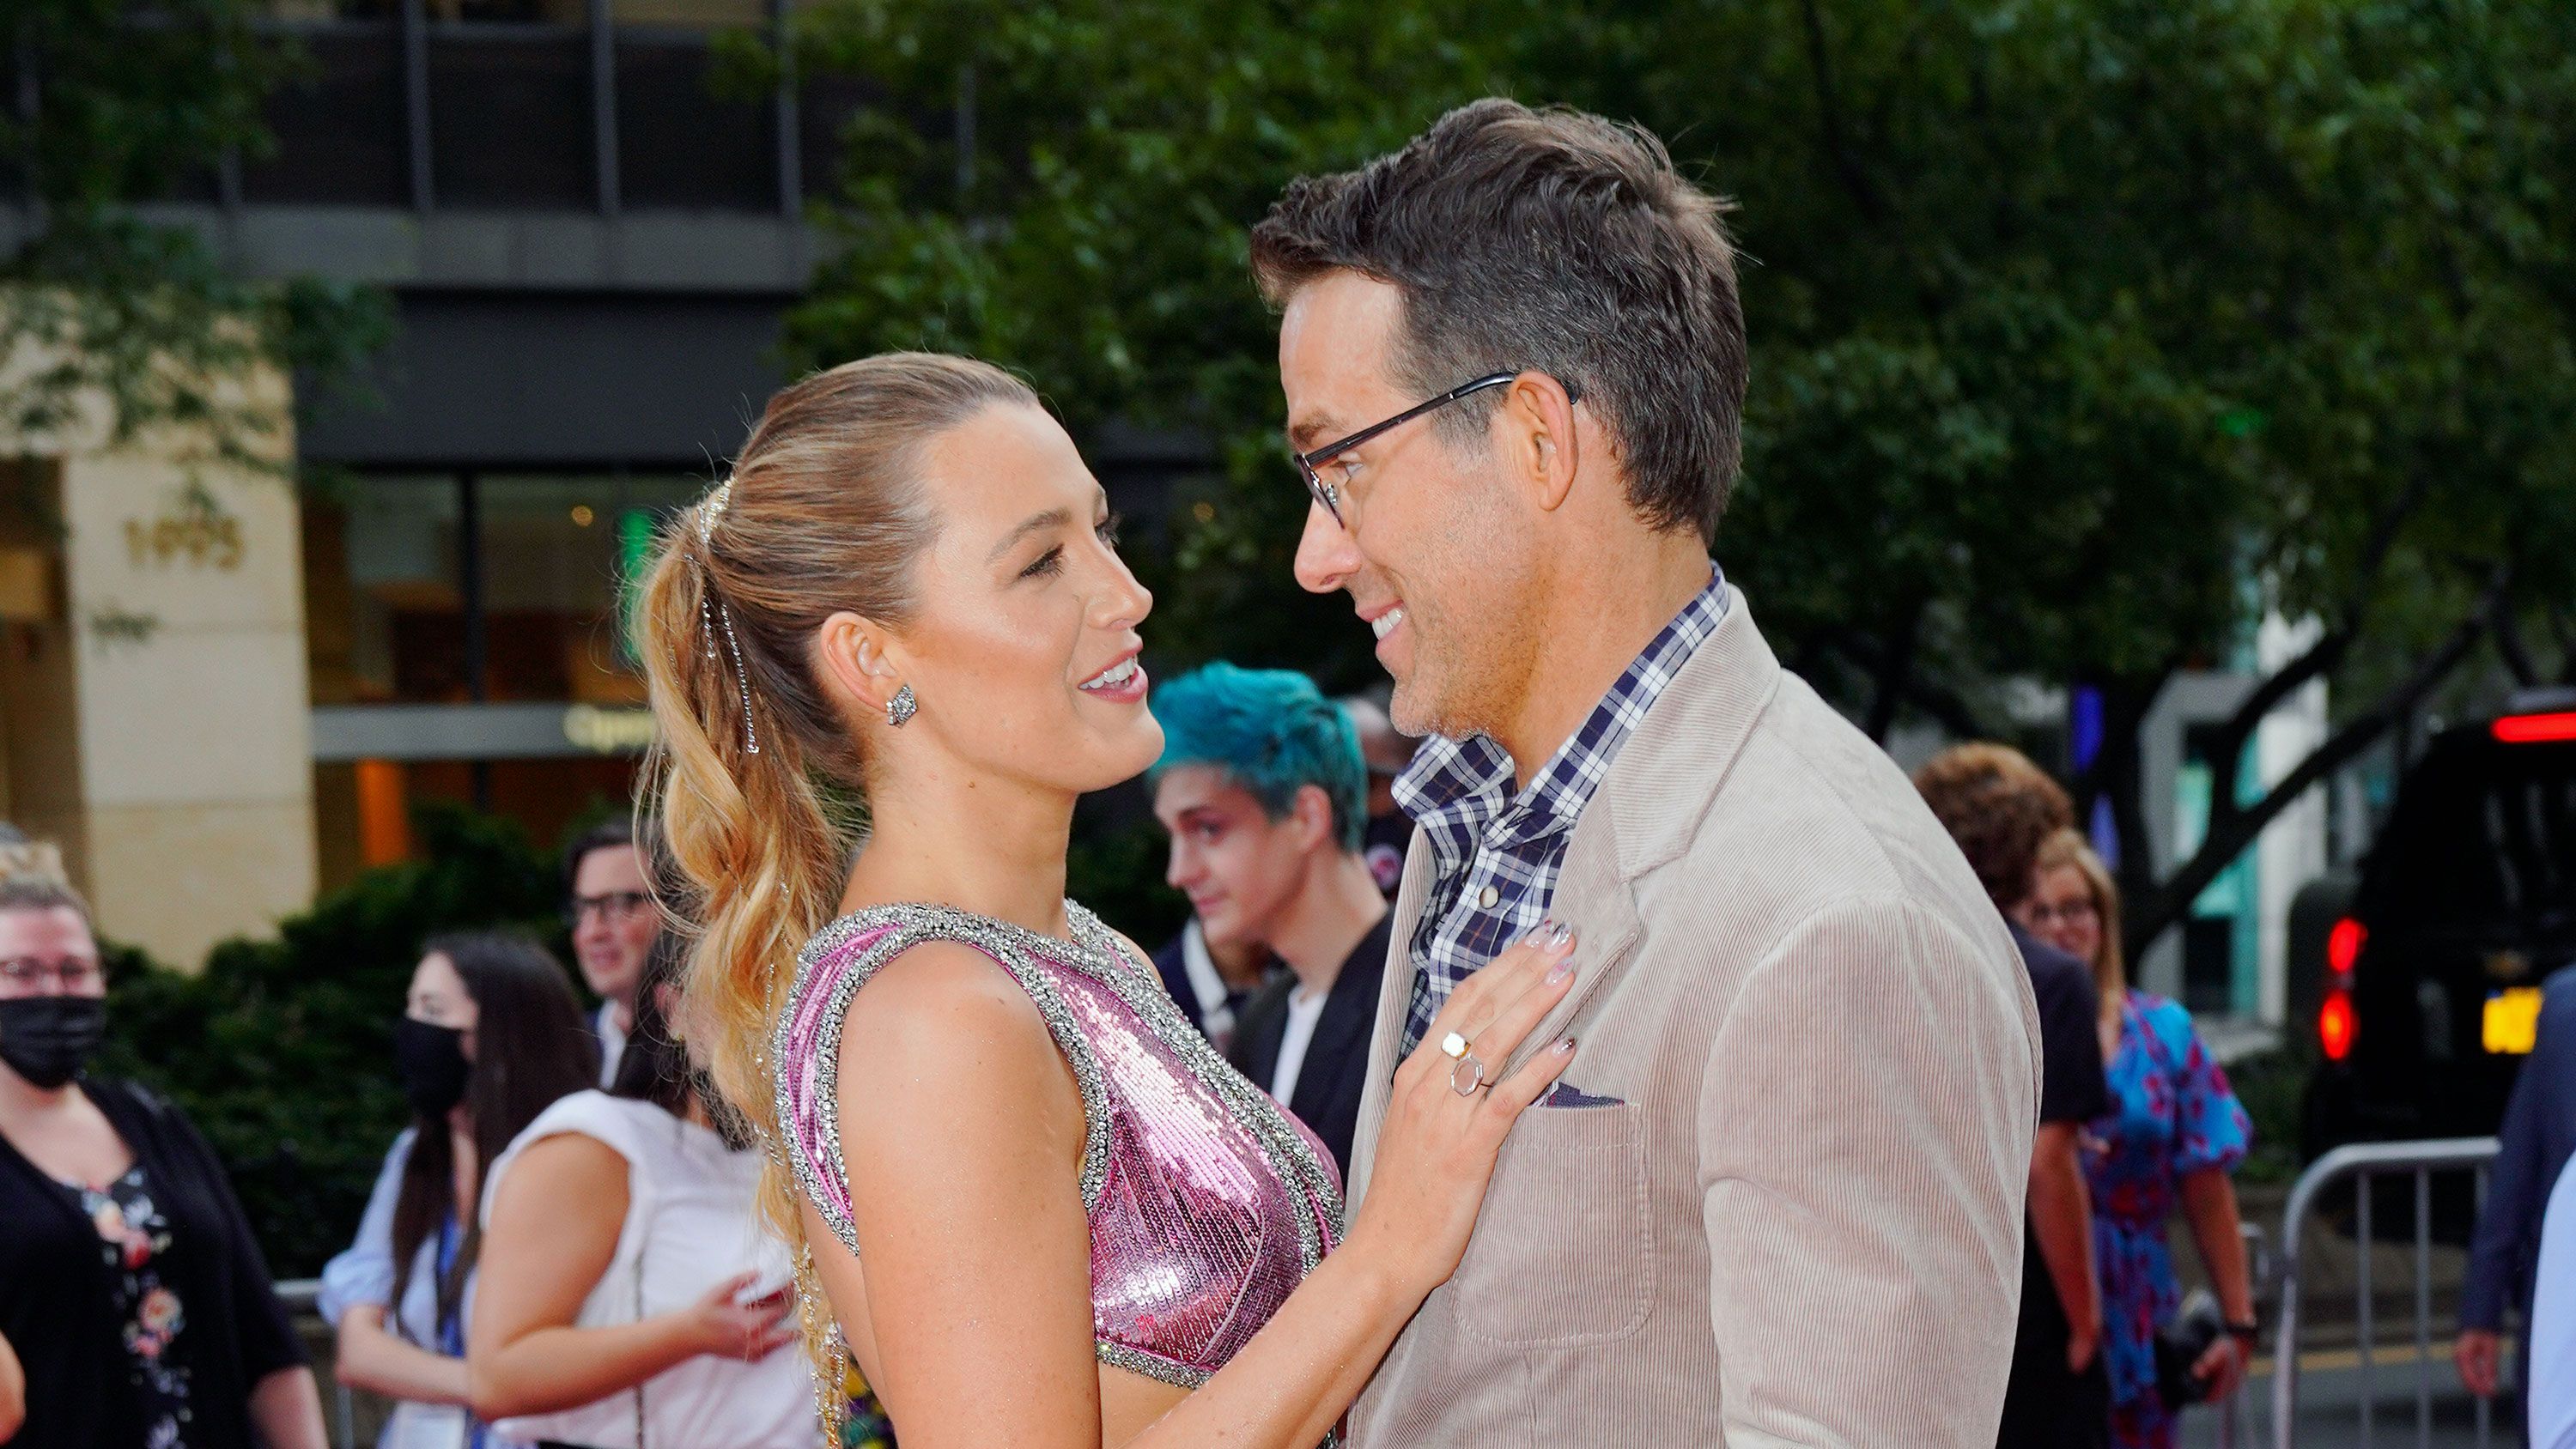 https://hips.hearstapps.com/hmg-prod/images/blake-lively-ryan-reynolds-gettyimages-1332239439.jpg?crop=1xw:0.7286269430051814xh;center,top